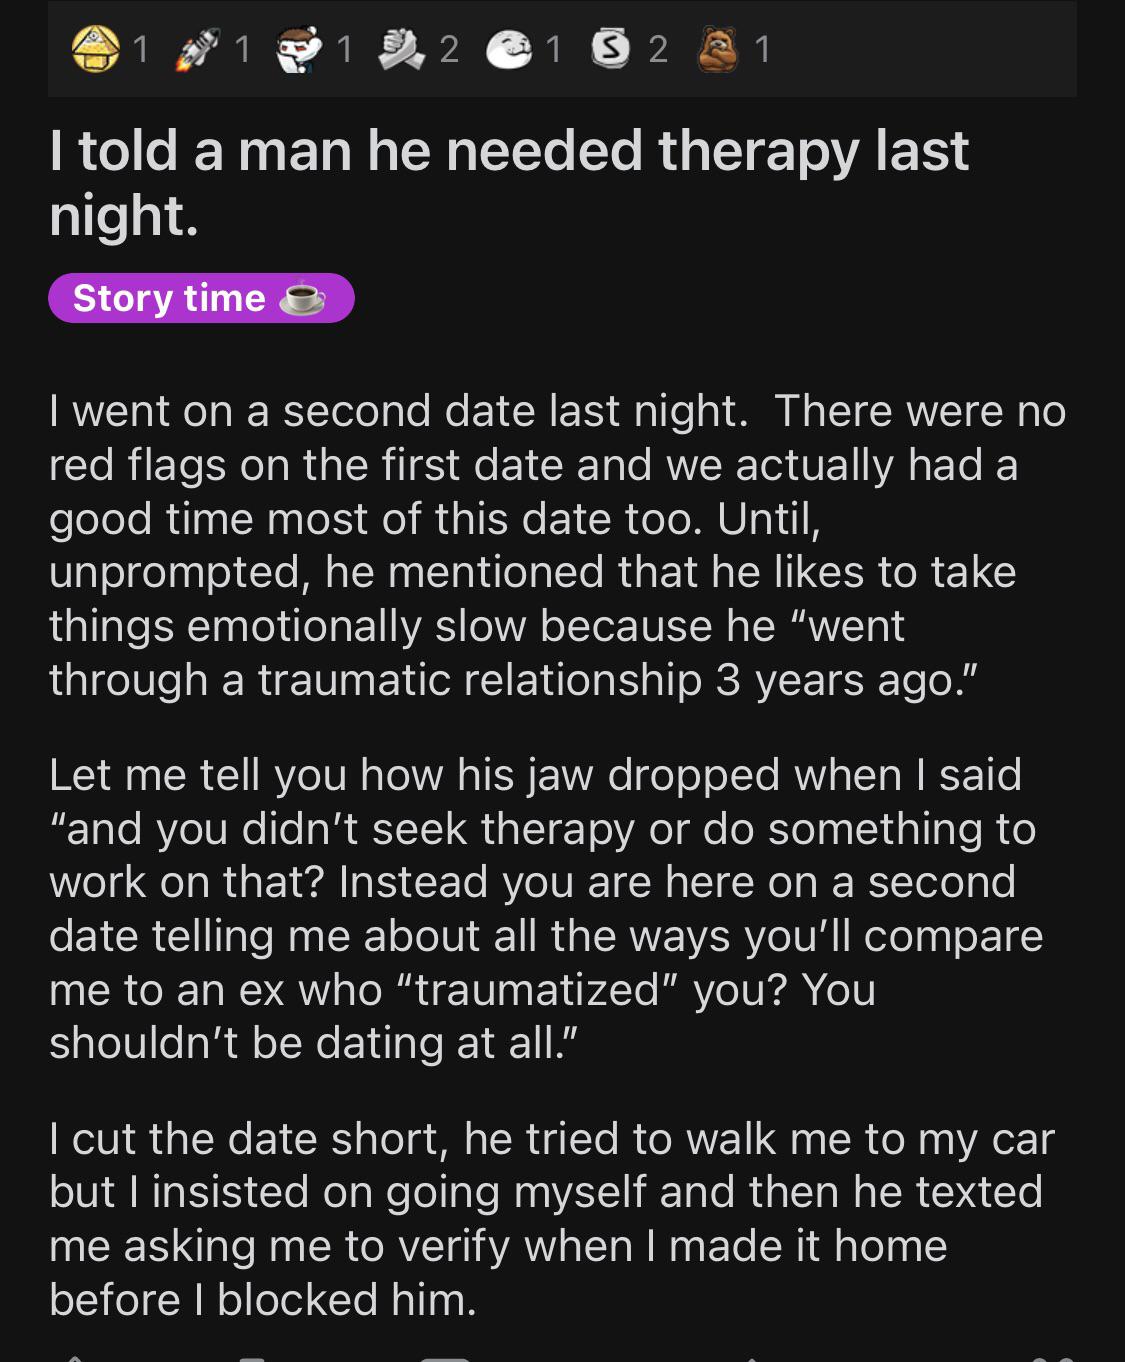 screenshot - 2 1 S 2 2 1 I told a man he needed therapy last night. Story time I went on a second date last night. There were no red flags on the first date and we actually had a good time most of this date too. Until, unprompted, he mentioned that he to 